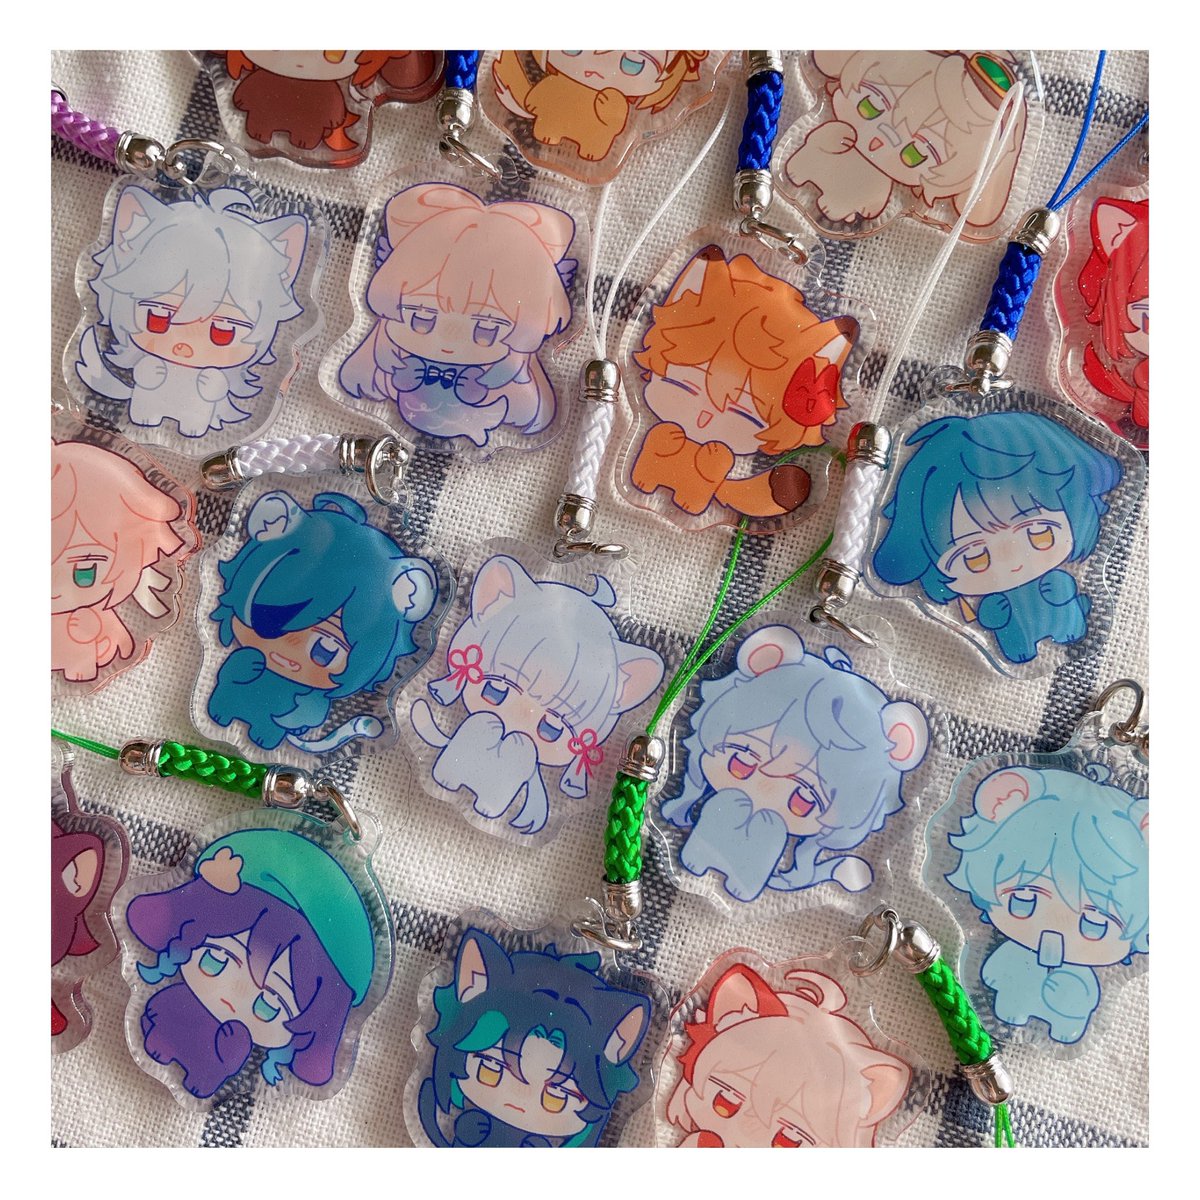 [RTs Appreciated ❣️]

Hellooo~ I've finally updated and opened my online store 😭 I now ship worldwide!! Charms are limited but I will open preorders after ^o^ Links are in replies

#原神 